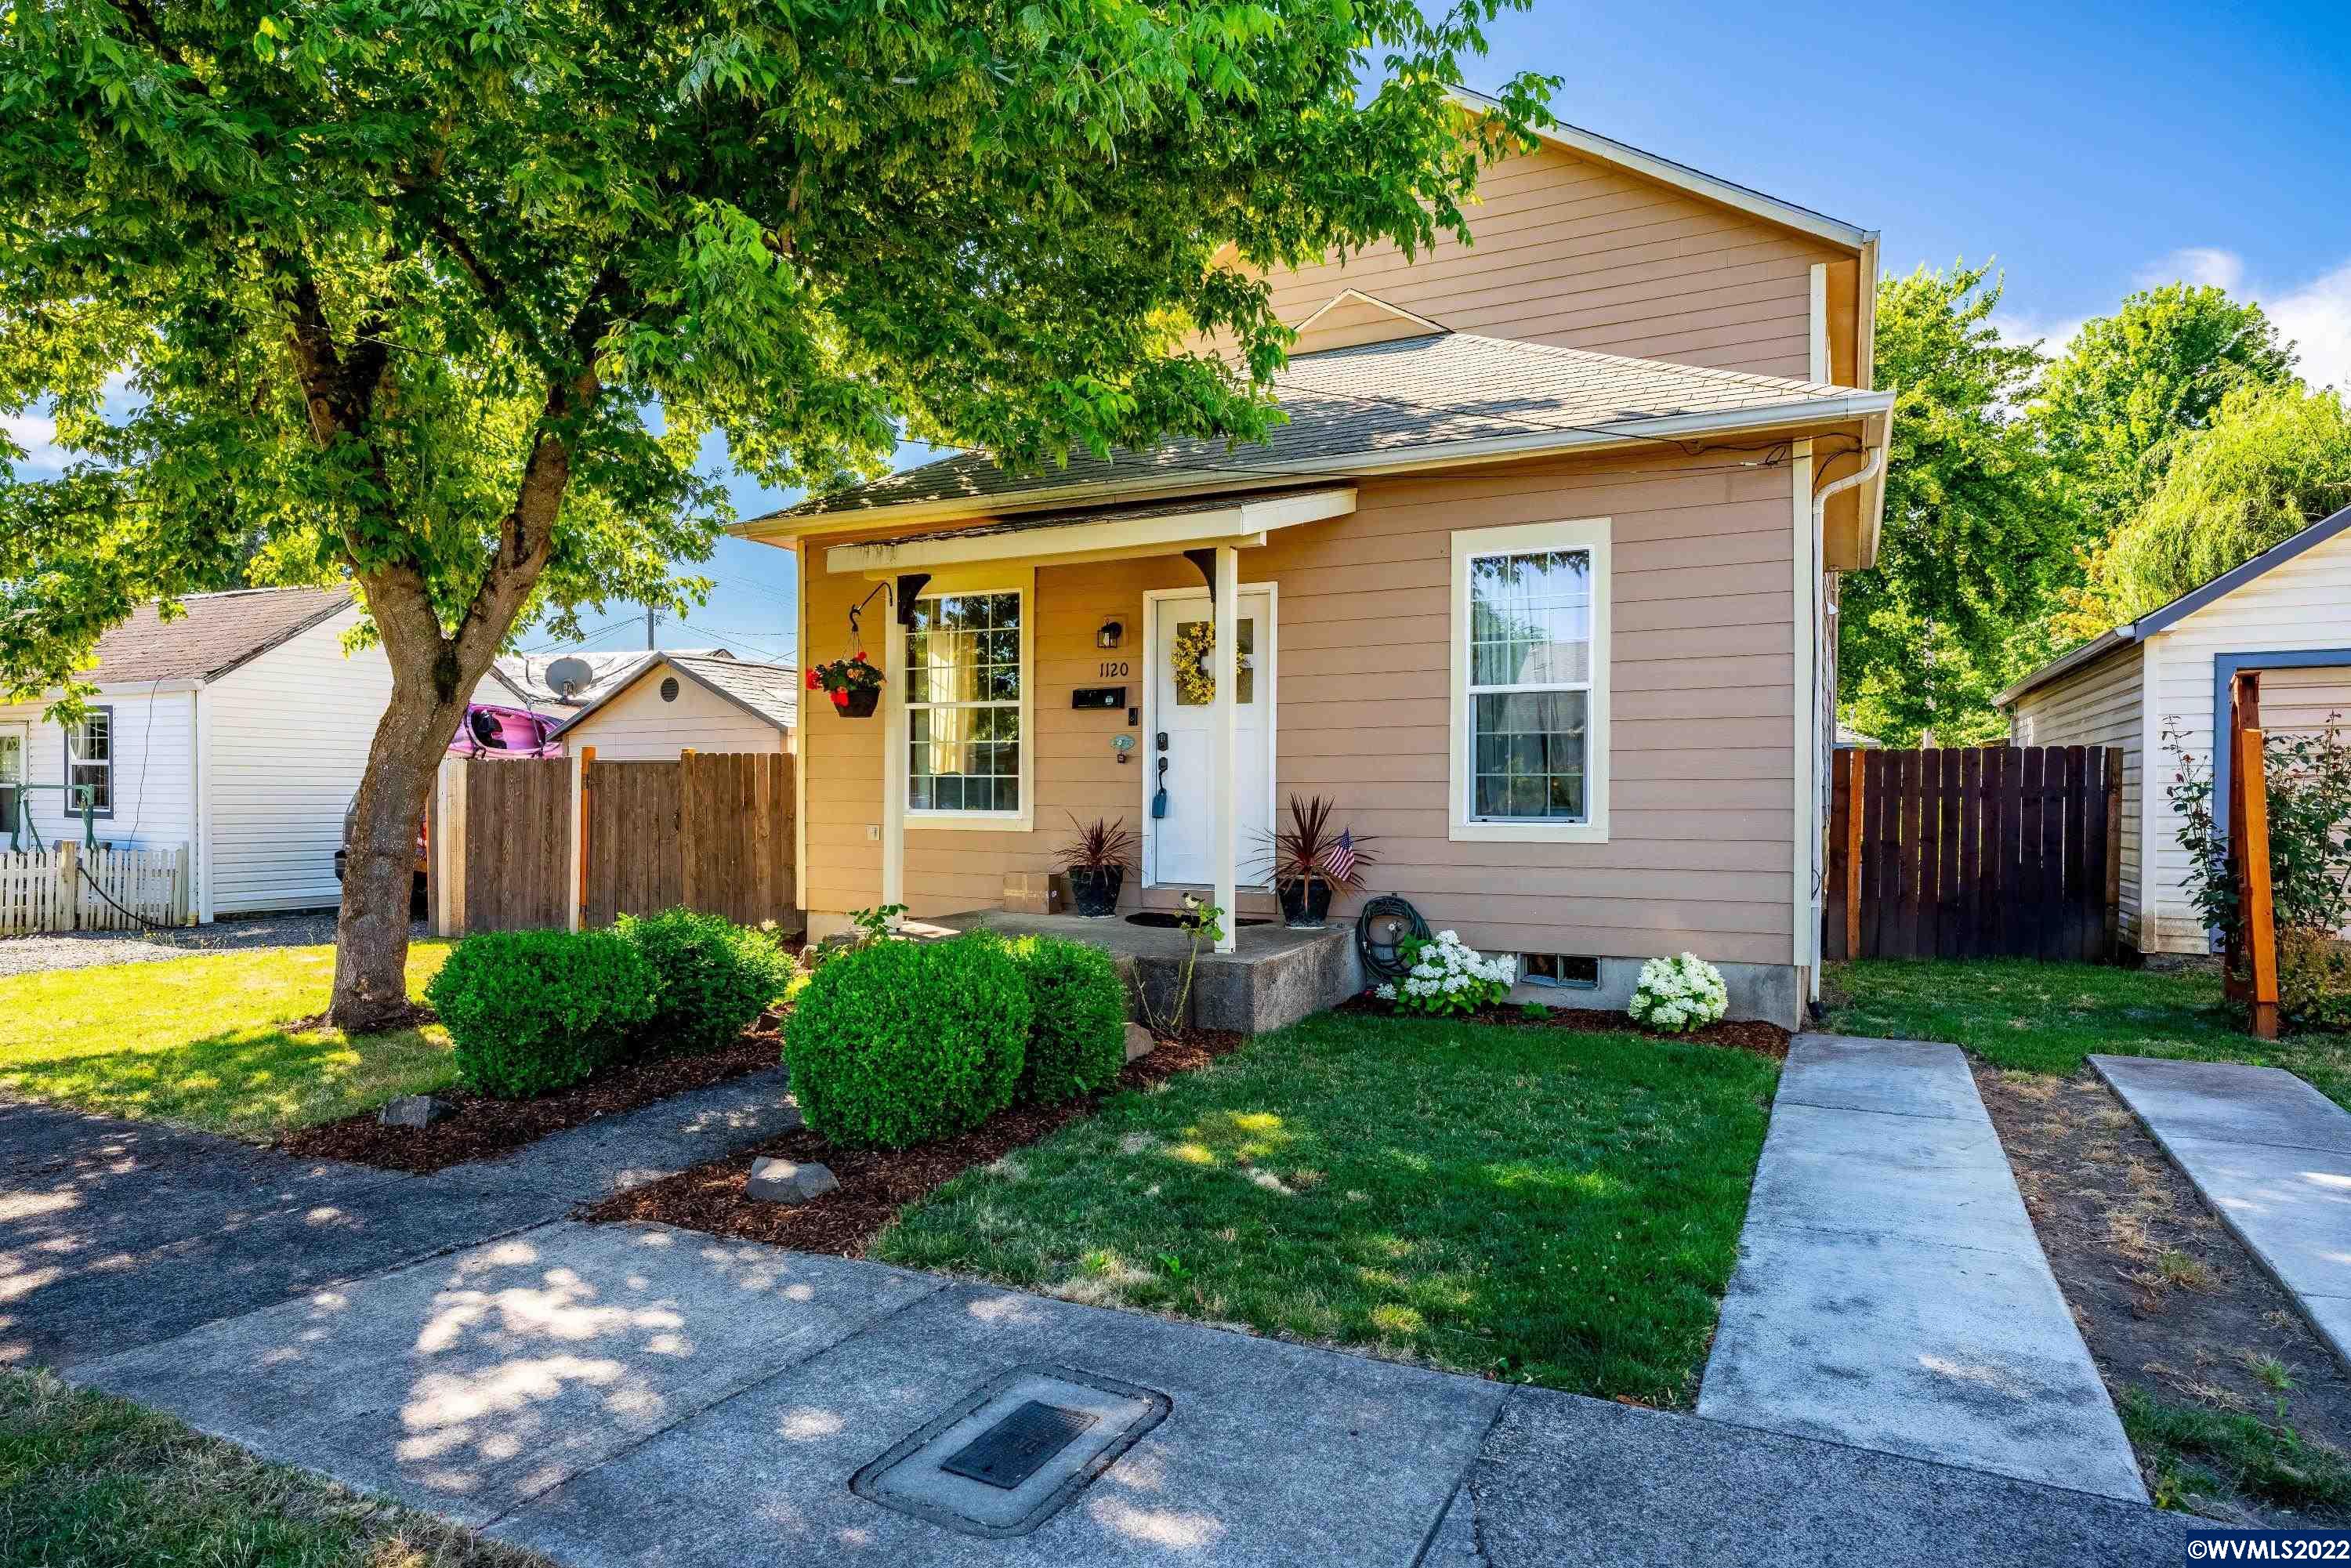 Historic Bungalow Charm meets modern day. Adorable 2 story home blocks  from Downtown Albany. Main level offers bright living/dining rm w/ tall ceilings and hard surface wood style flooring. Cozy kitchen/ s/s sink, oven, BI microwave. Laundry m. 2 bdrms and Pantry/mudrm leads out to deck, fenced backyard, lawn, 10x20 Shed/bonus rm. Upstairs are Lg Primary rm upstairs w/ full bathrm and 4th bdrm. Parking in Front driveway and back gated gravel area. Foundation, plumbing and electrical redone 2003.